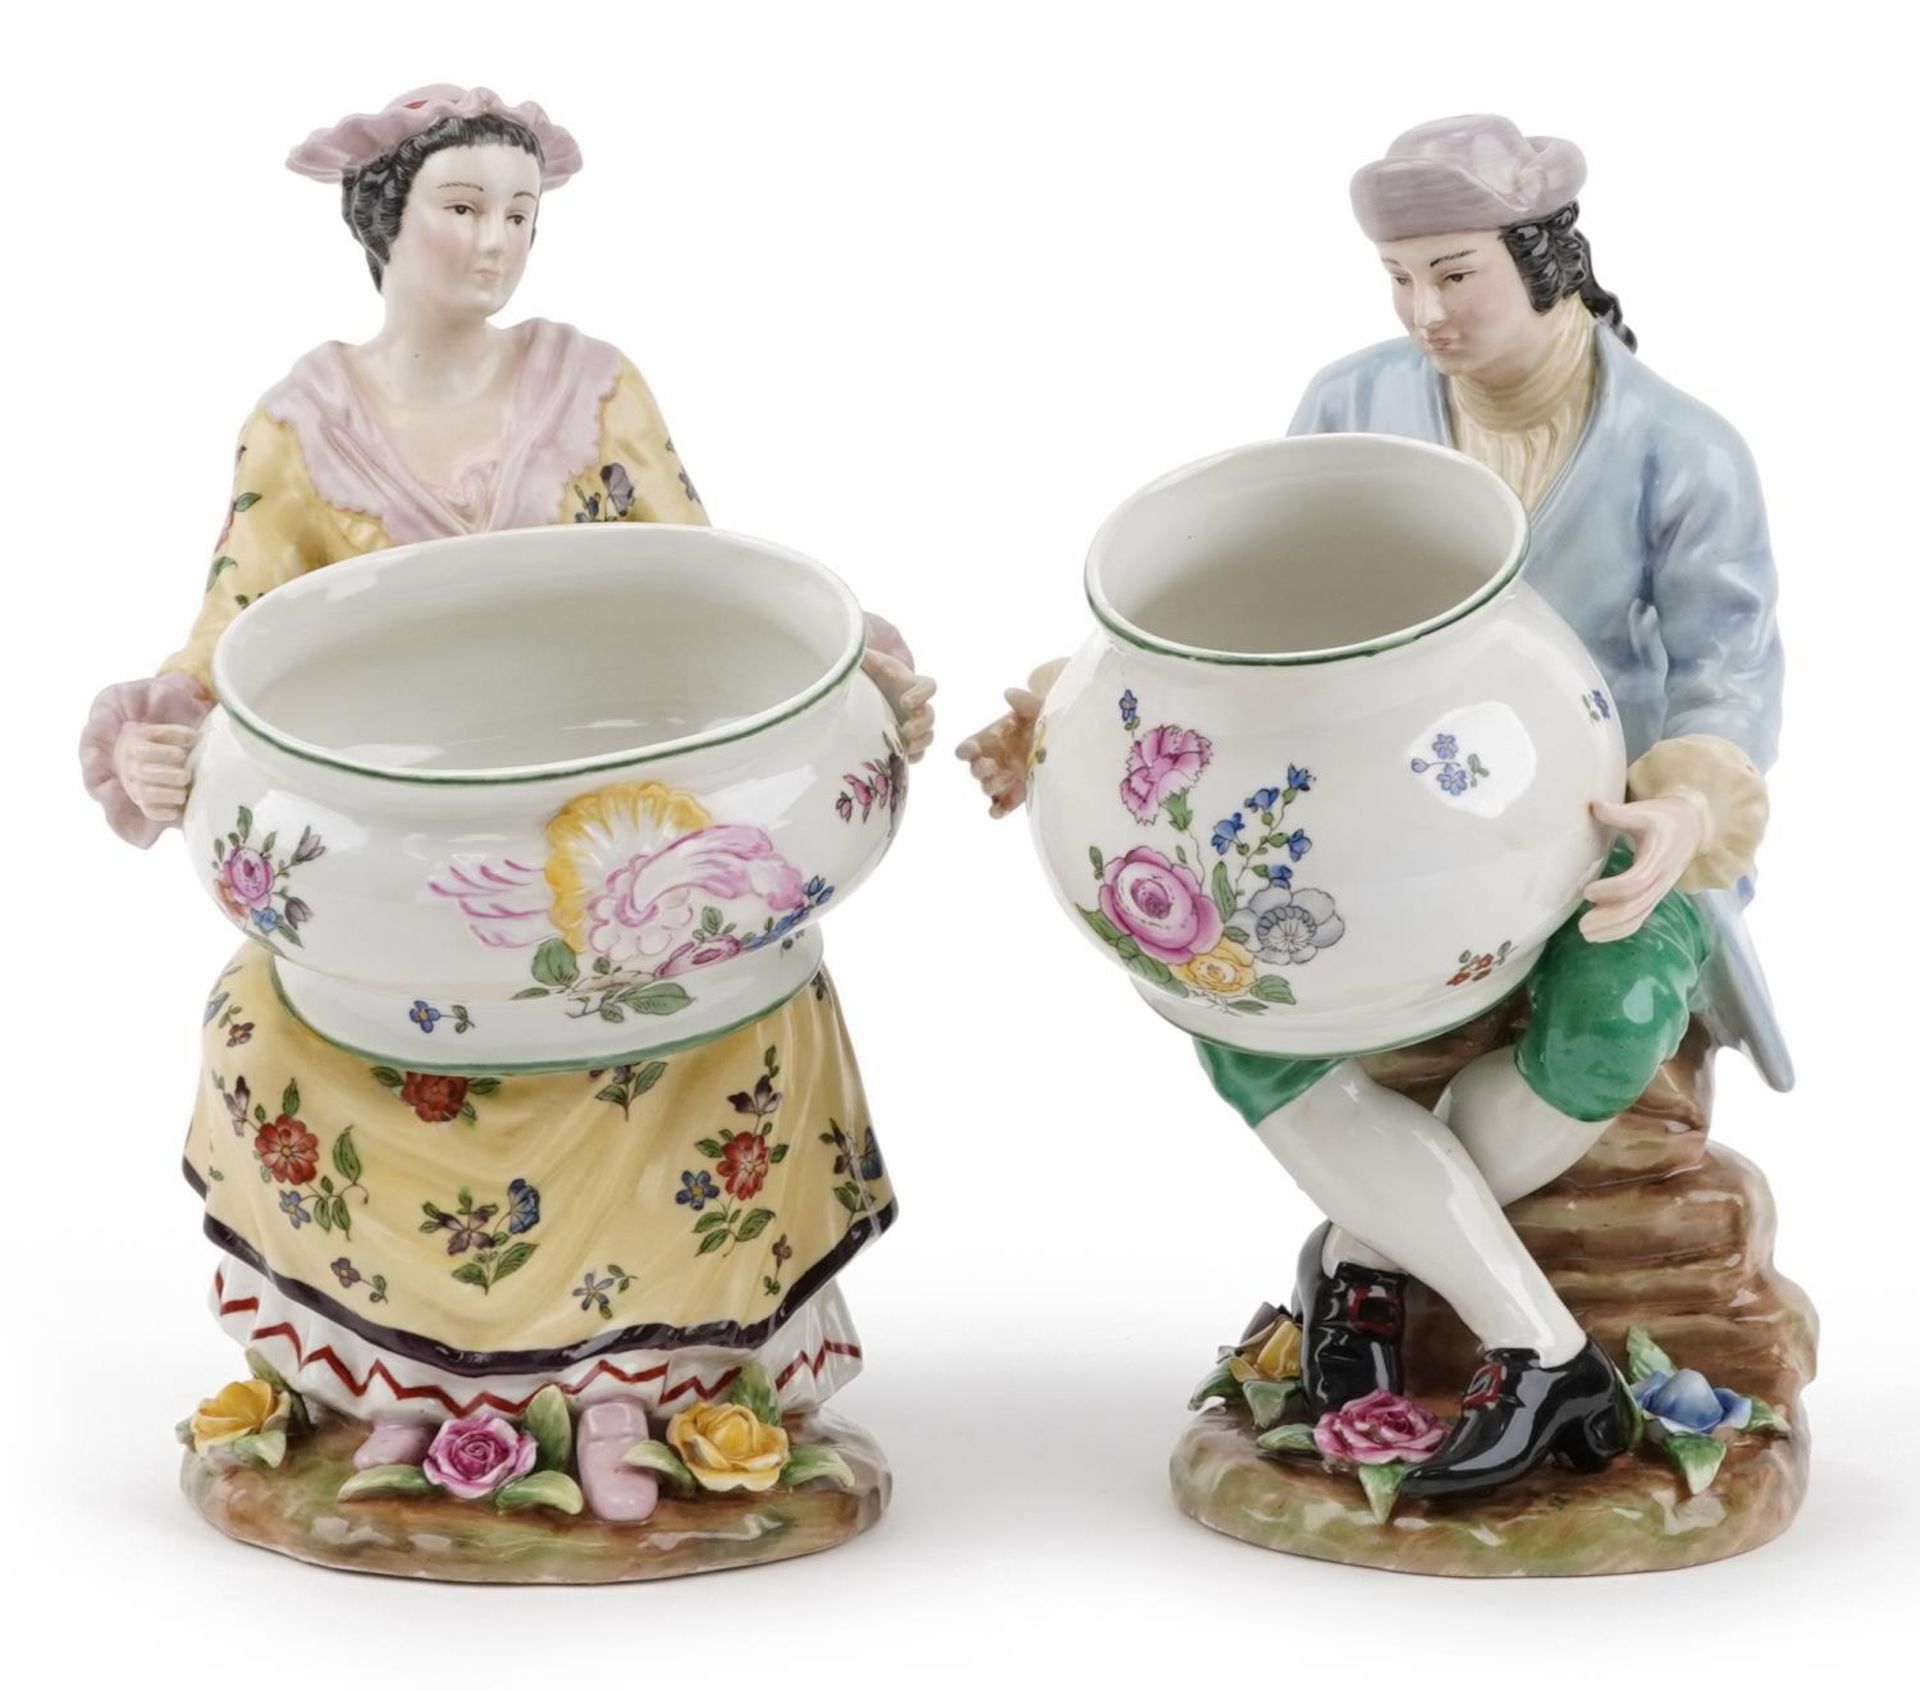 Manner of Sevres, pair of continental porcelain figures, each holding a bowl, the largest 30cm